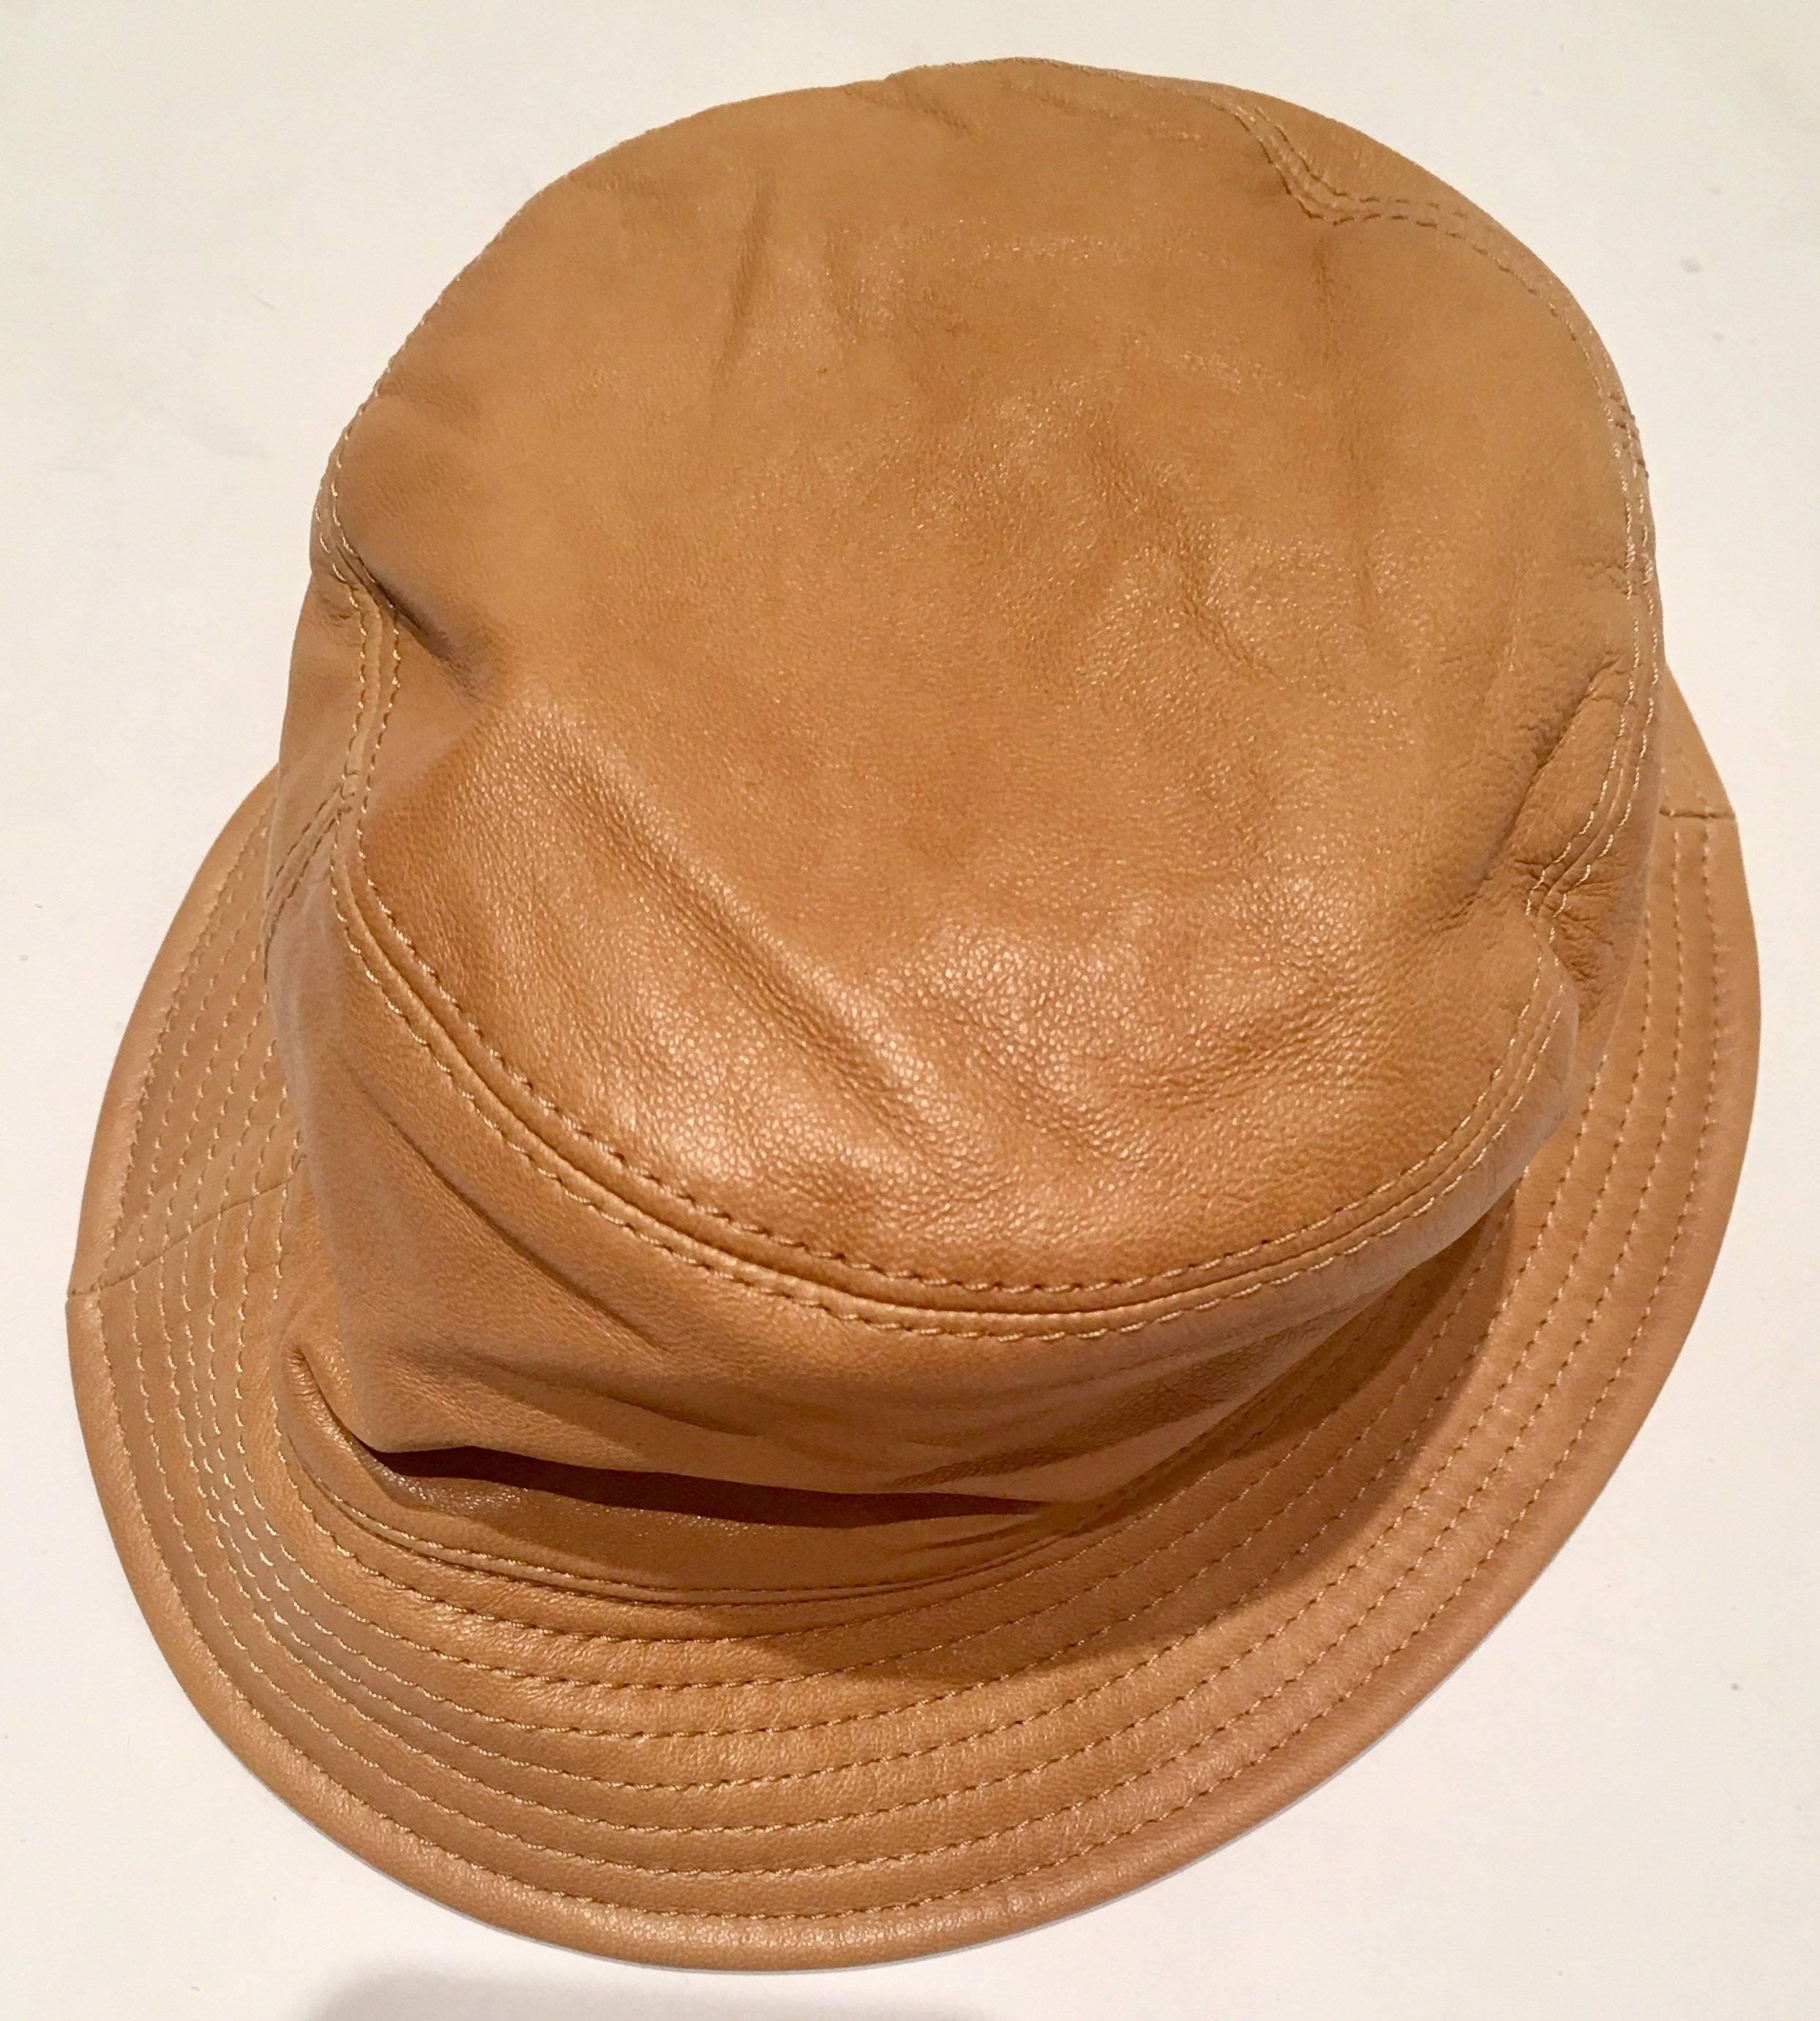 Iconic Burberry check and camel leather bucket hat. Original manufacturer tag intact, sewn into interior and reads, Burberry London. Interior diameter, 6.25